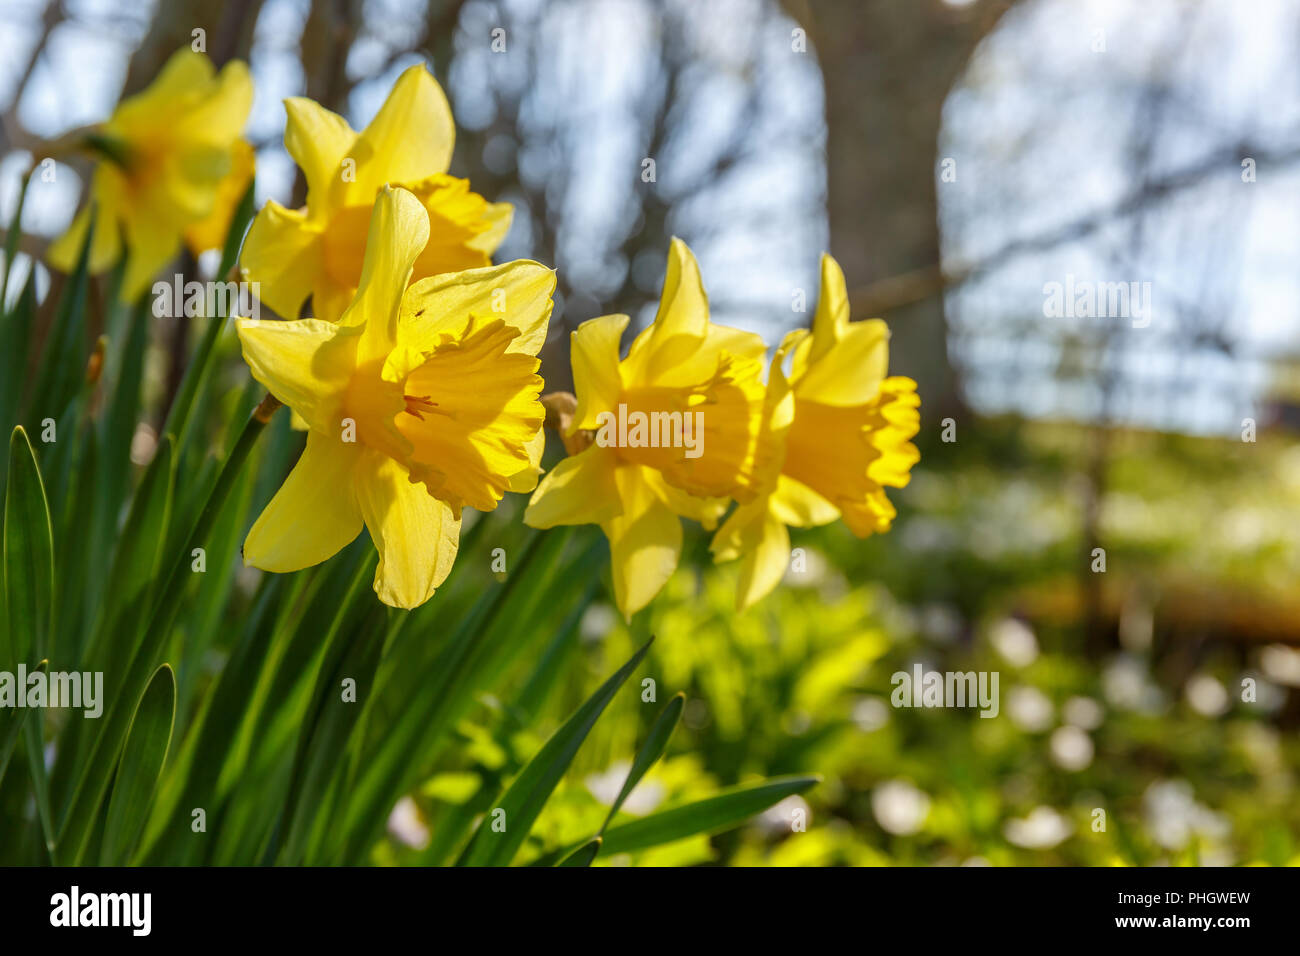 Close-up of Daffodils flowers in bloom at spring Stock Photo